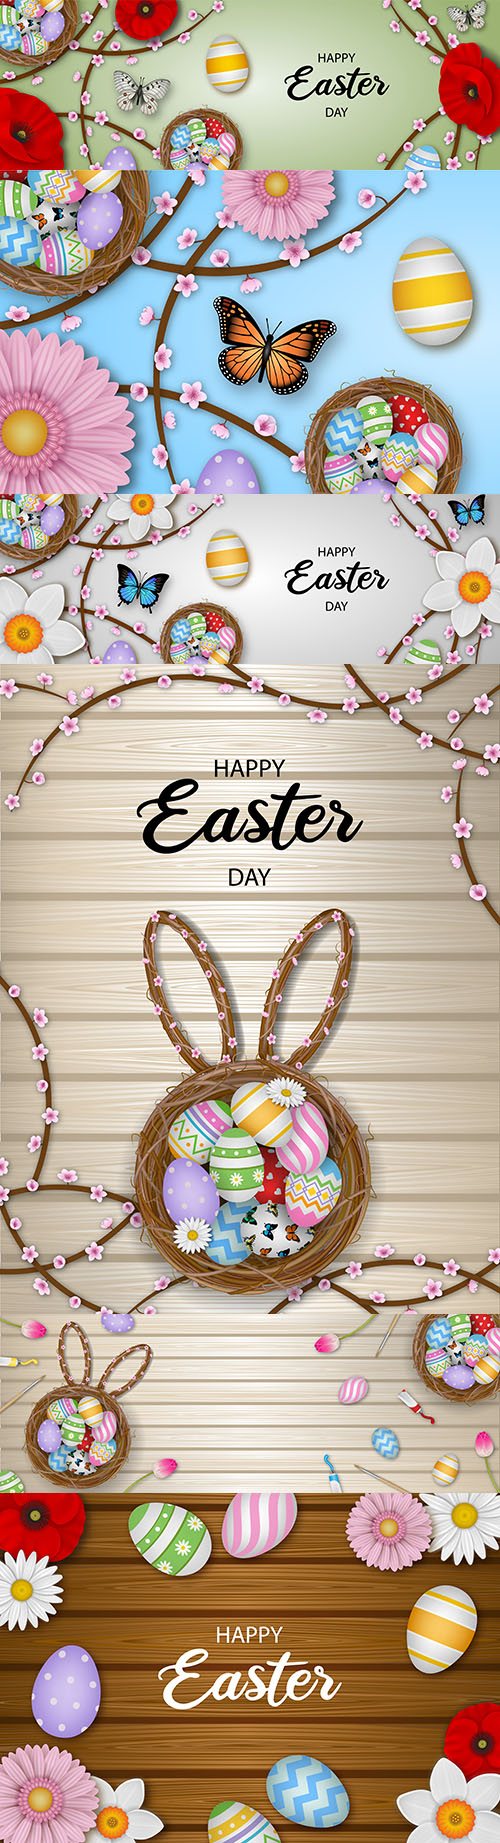 Happy Easter background and design banner with colorful eggs 3
